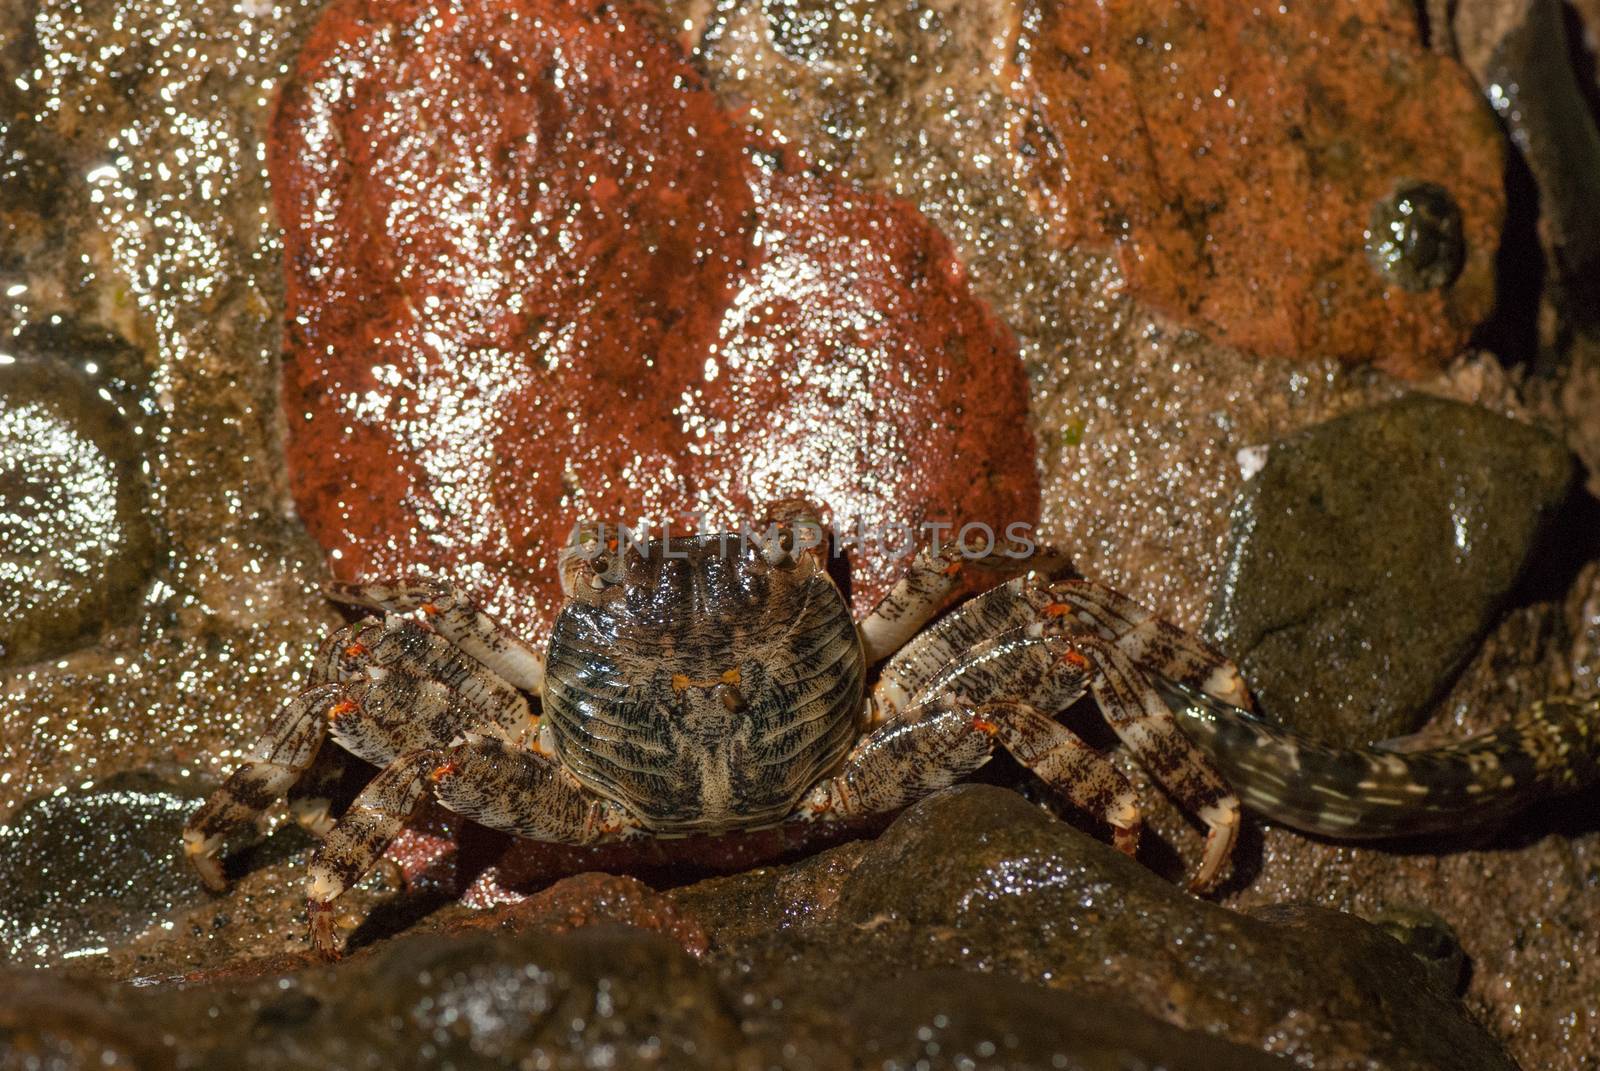 Wet sea crab on the stone at night.